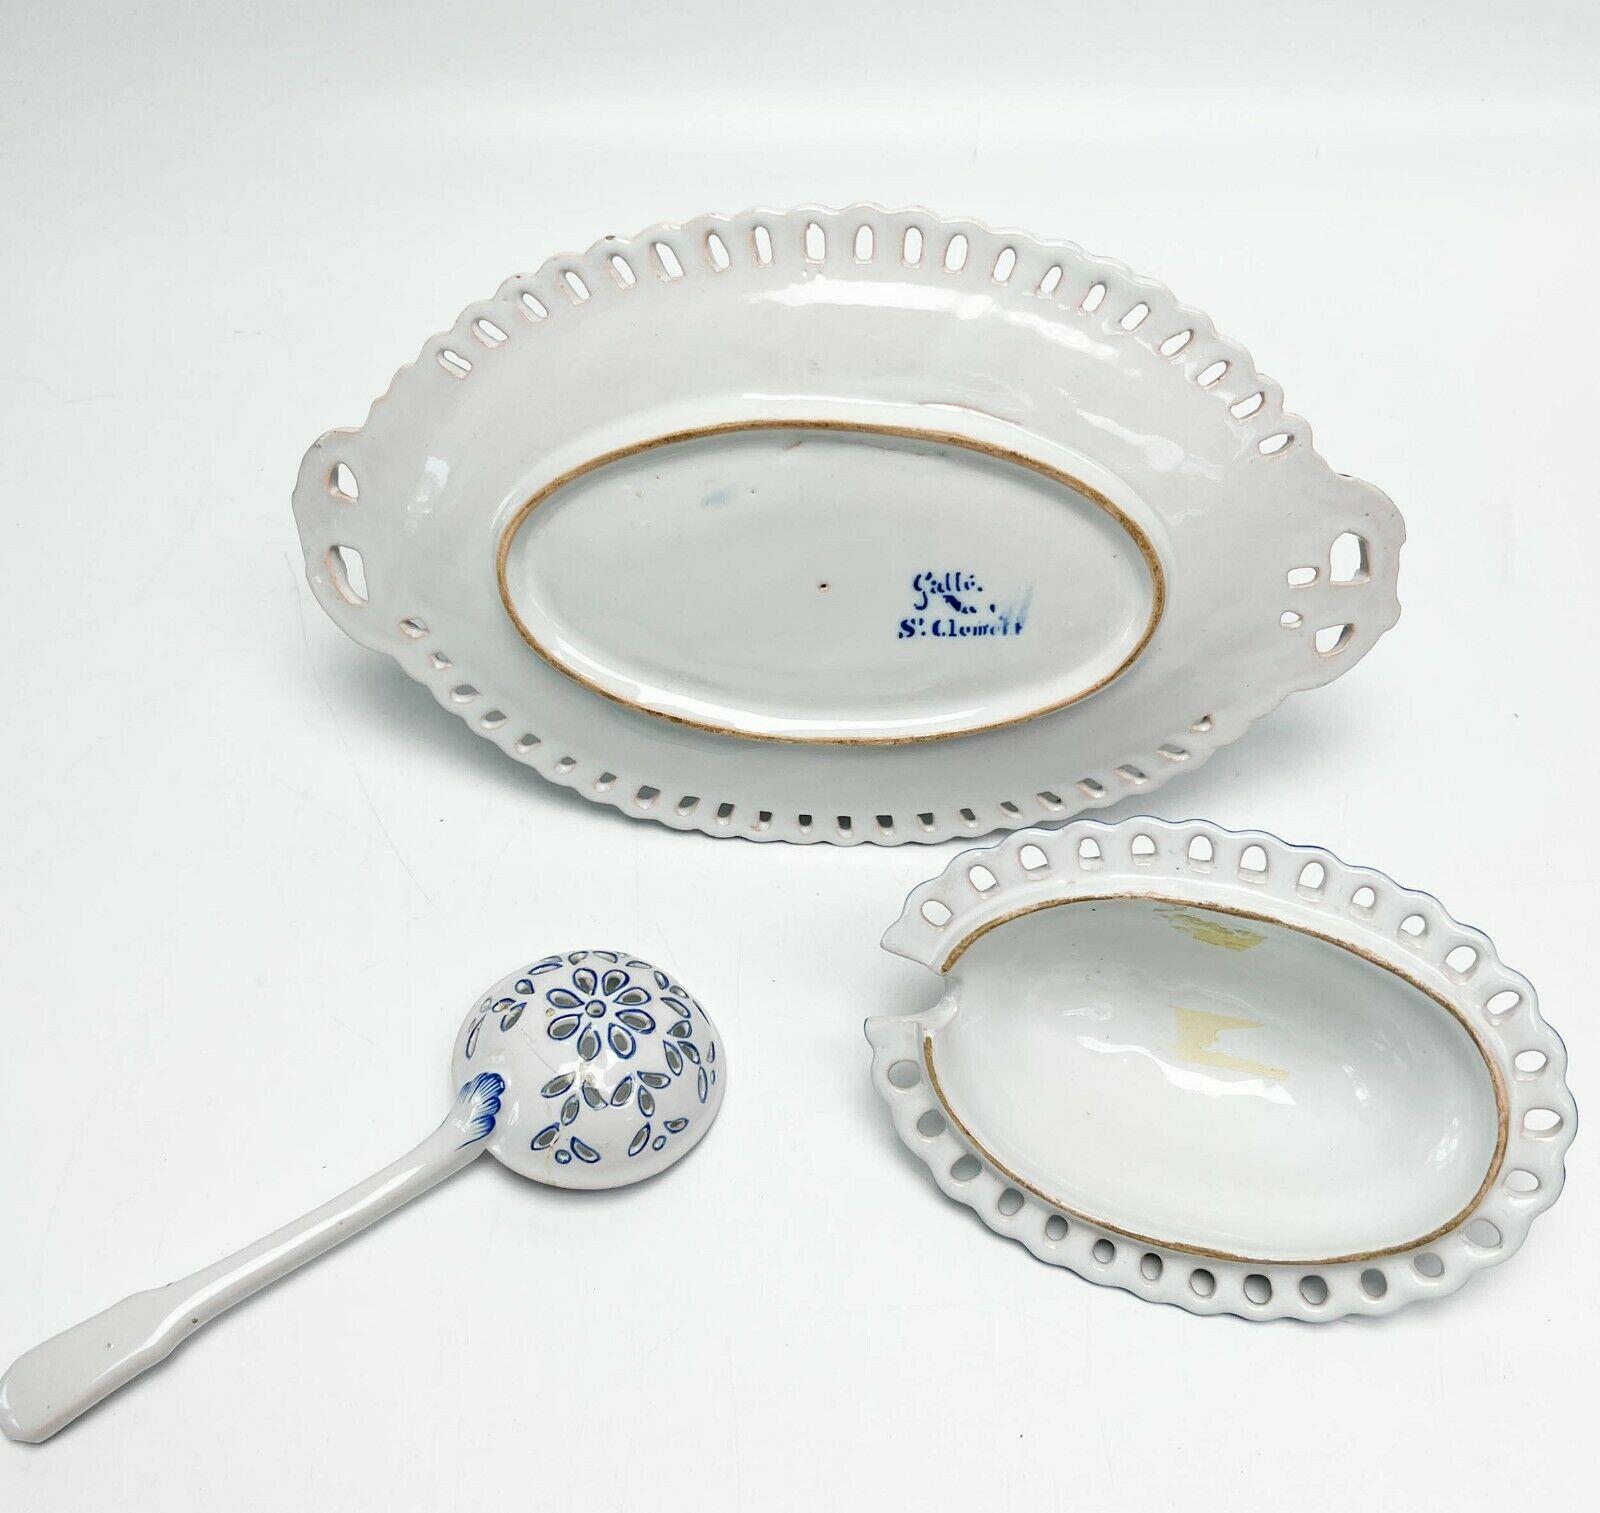 Galle Faience France Reticulated Porcelain Lidded Sauce Tureen with Assoc Spoon For Sale 2